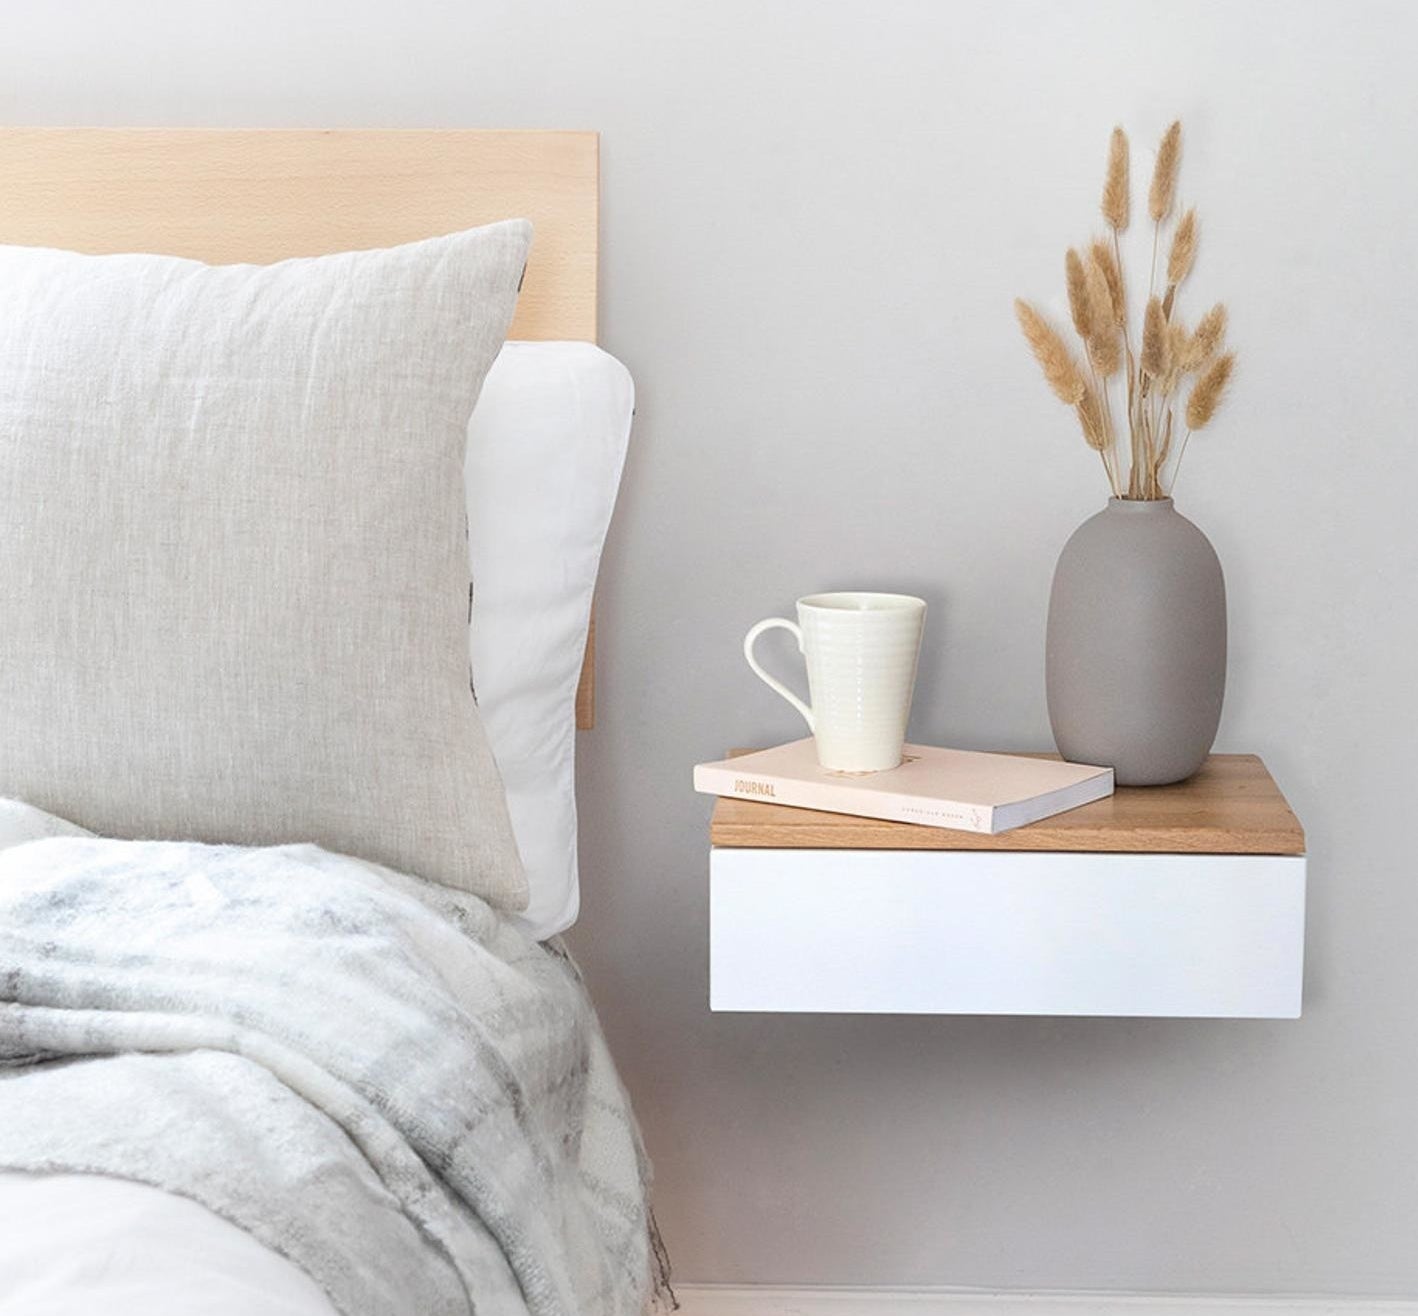 Rectangle white wood drawer with a light brown wood top attached to the wall next to the bed with a book, coffee cup, and vase on it